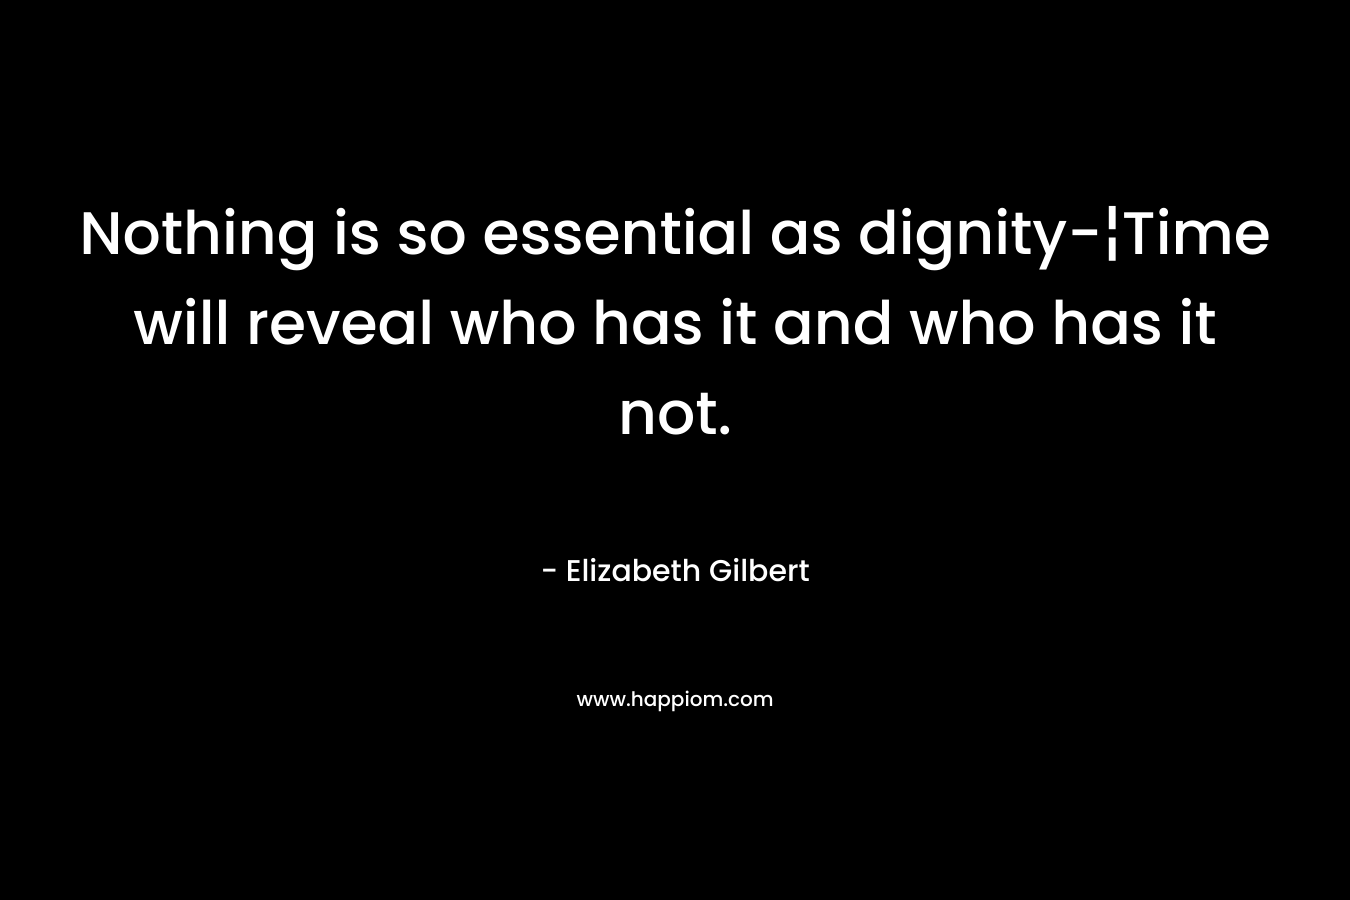 Nothing is so essential as dignity-¦Time will reveal who has it and who has it not.